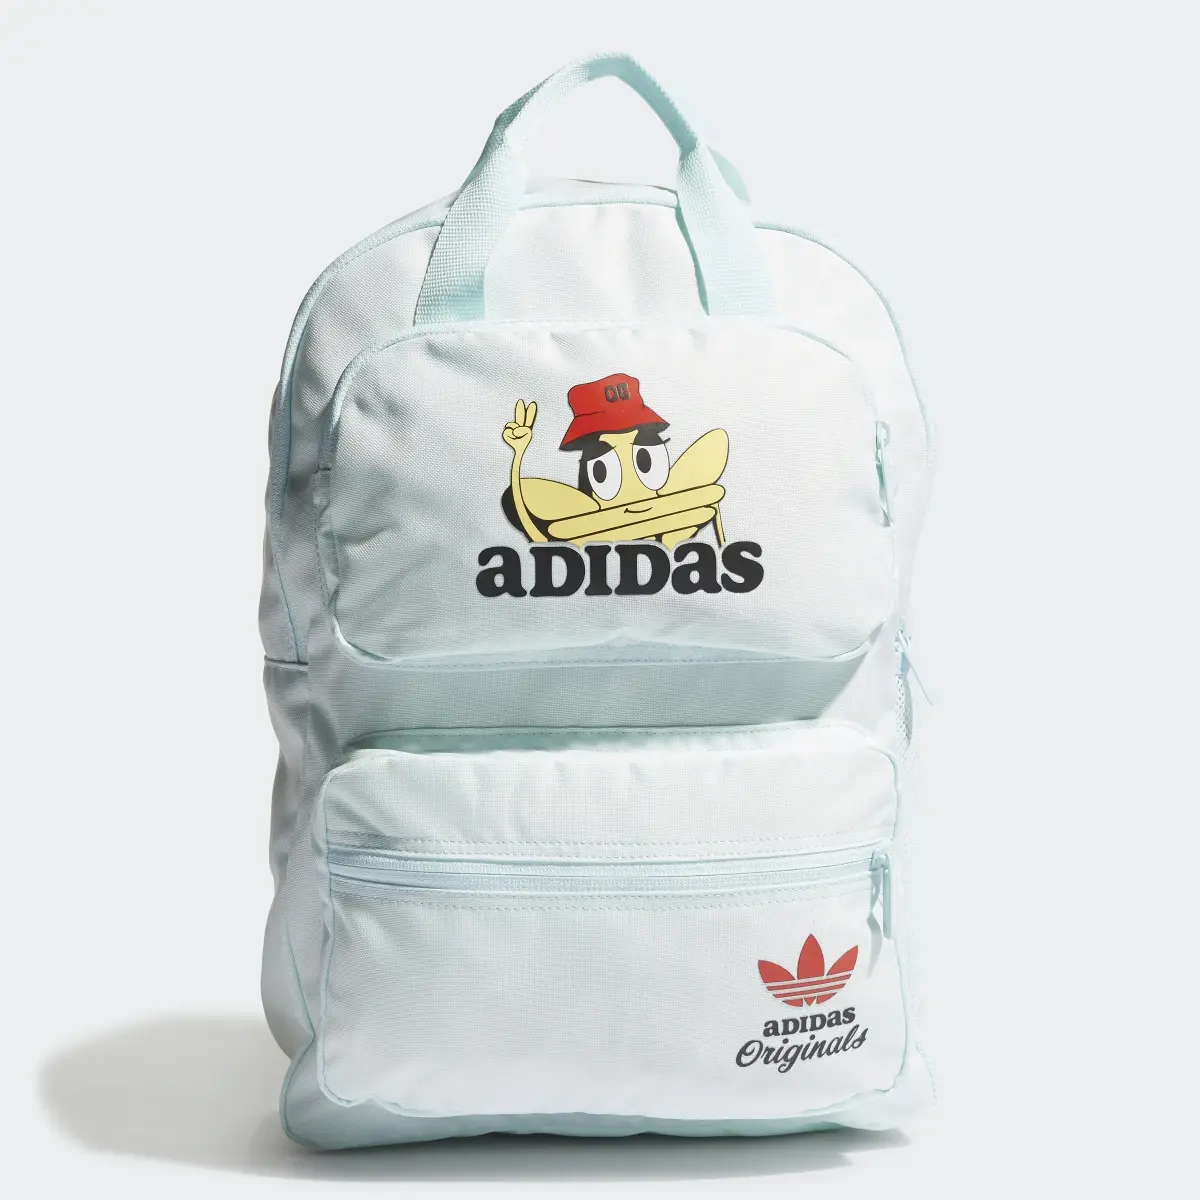 Adidas Fun Trefoil Two-Way Backpack. 2